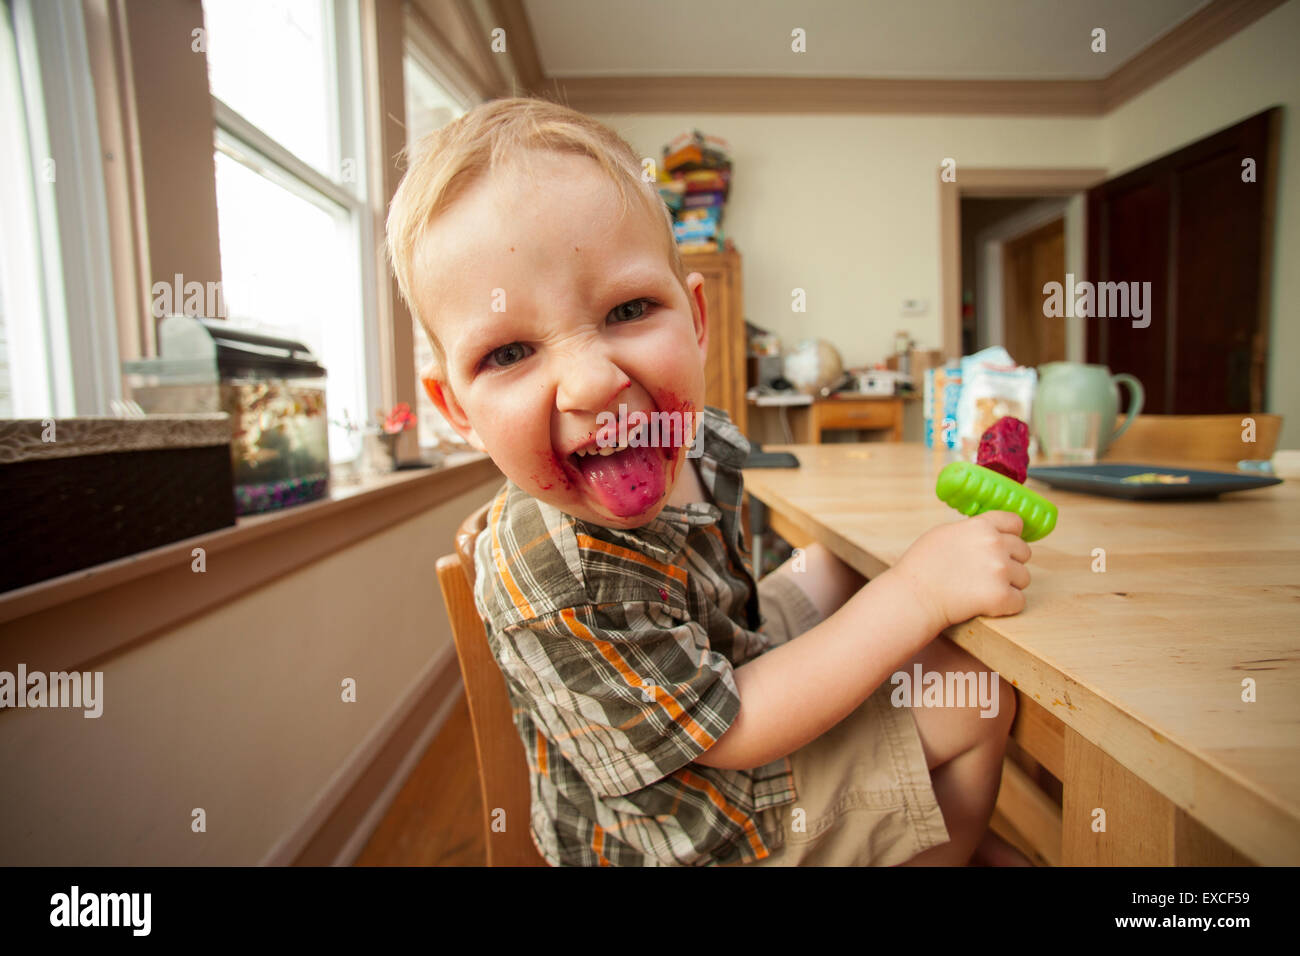 A young blond boy eating a popsicle with a messy face sticks his tongue out. Stock Photo